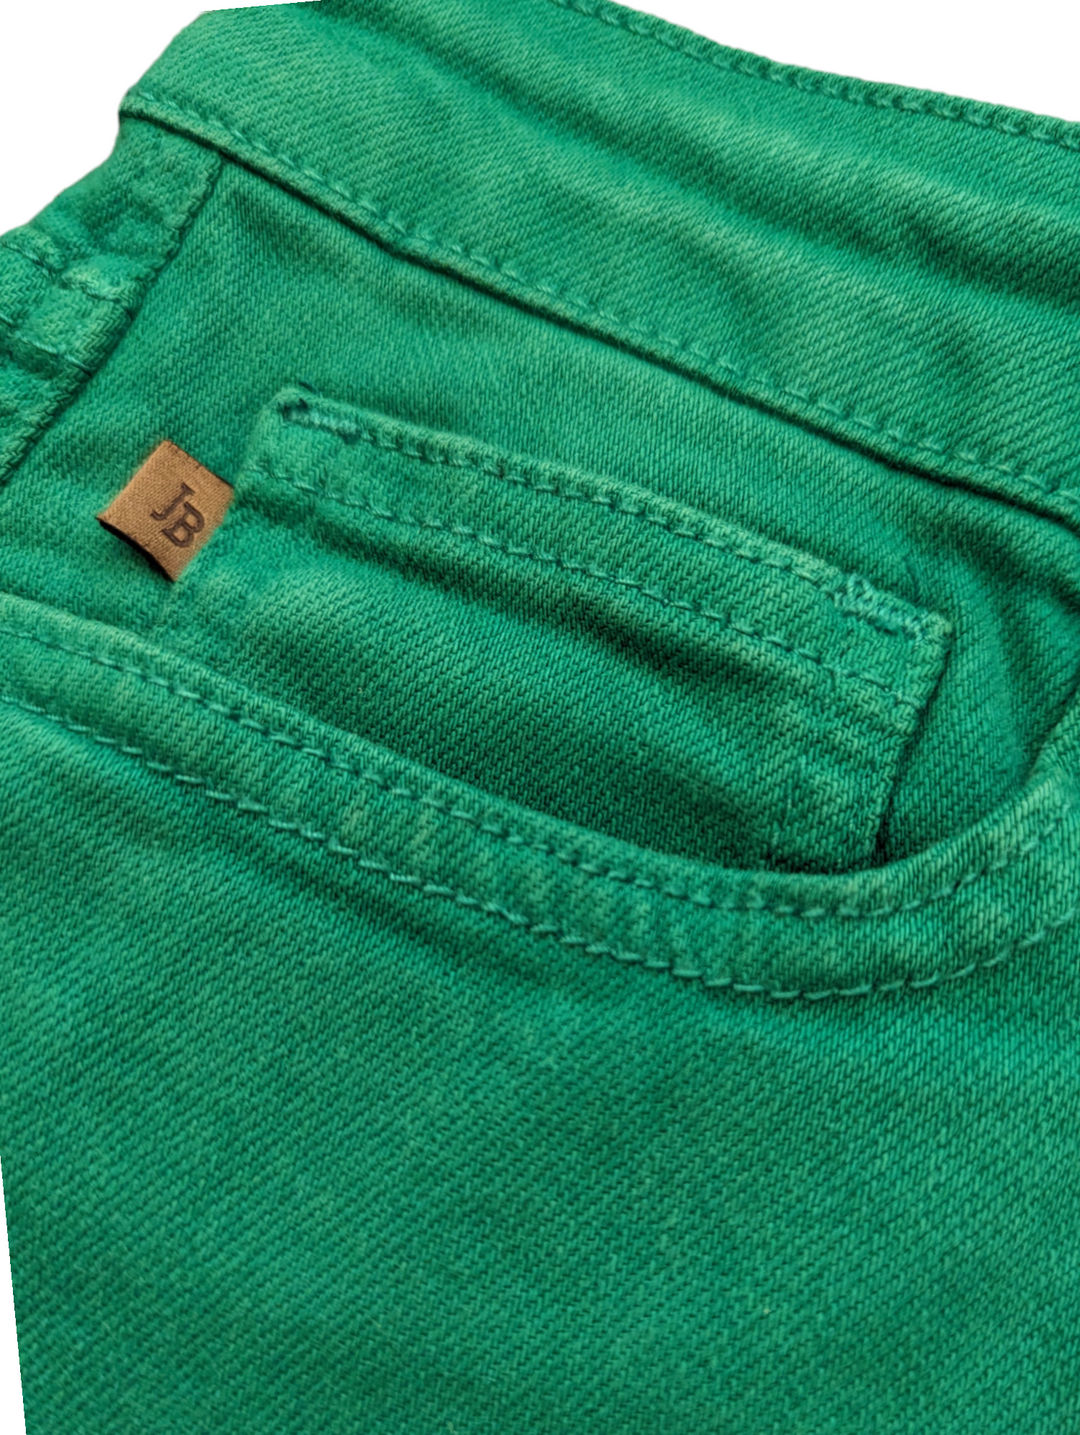 detail view of the kelly crop jean watch pocket